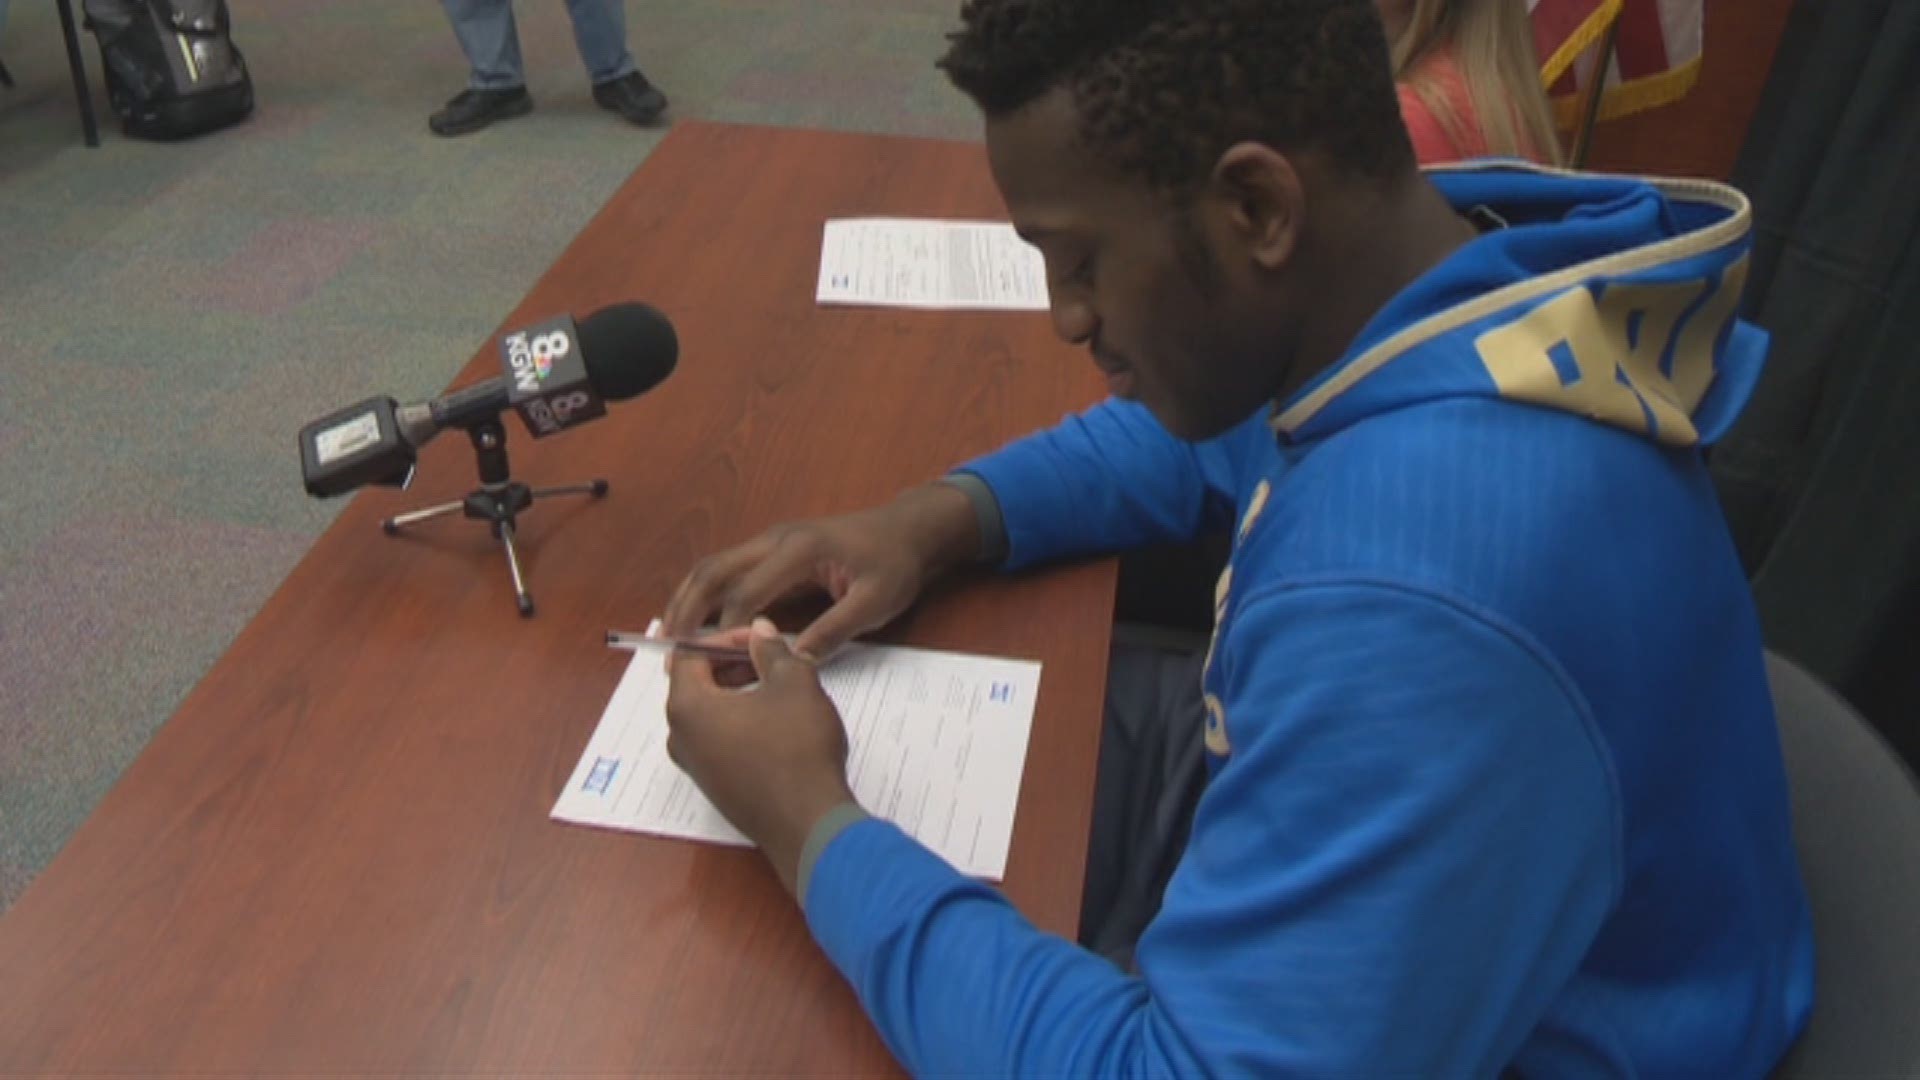 Local athletes sign national letters of intent